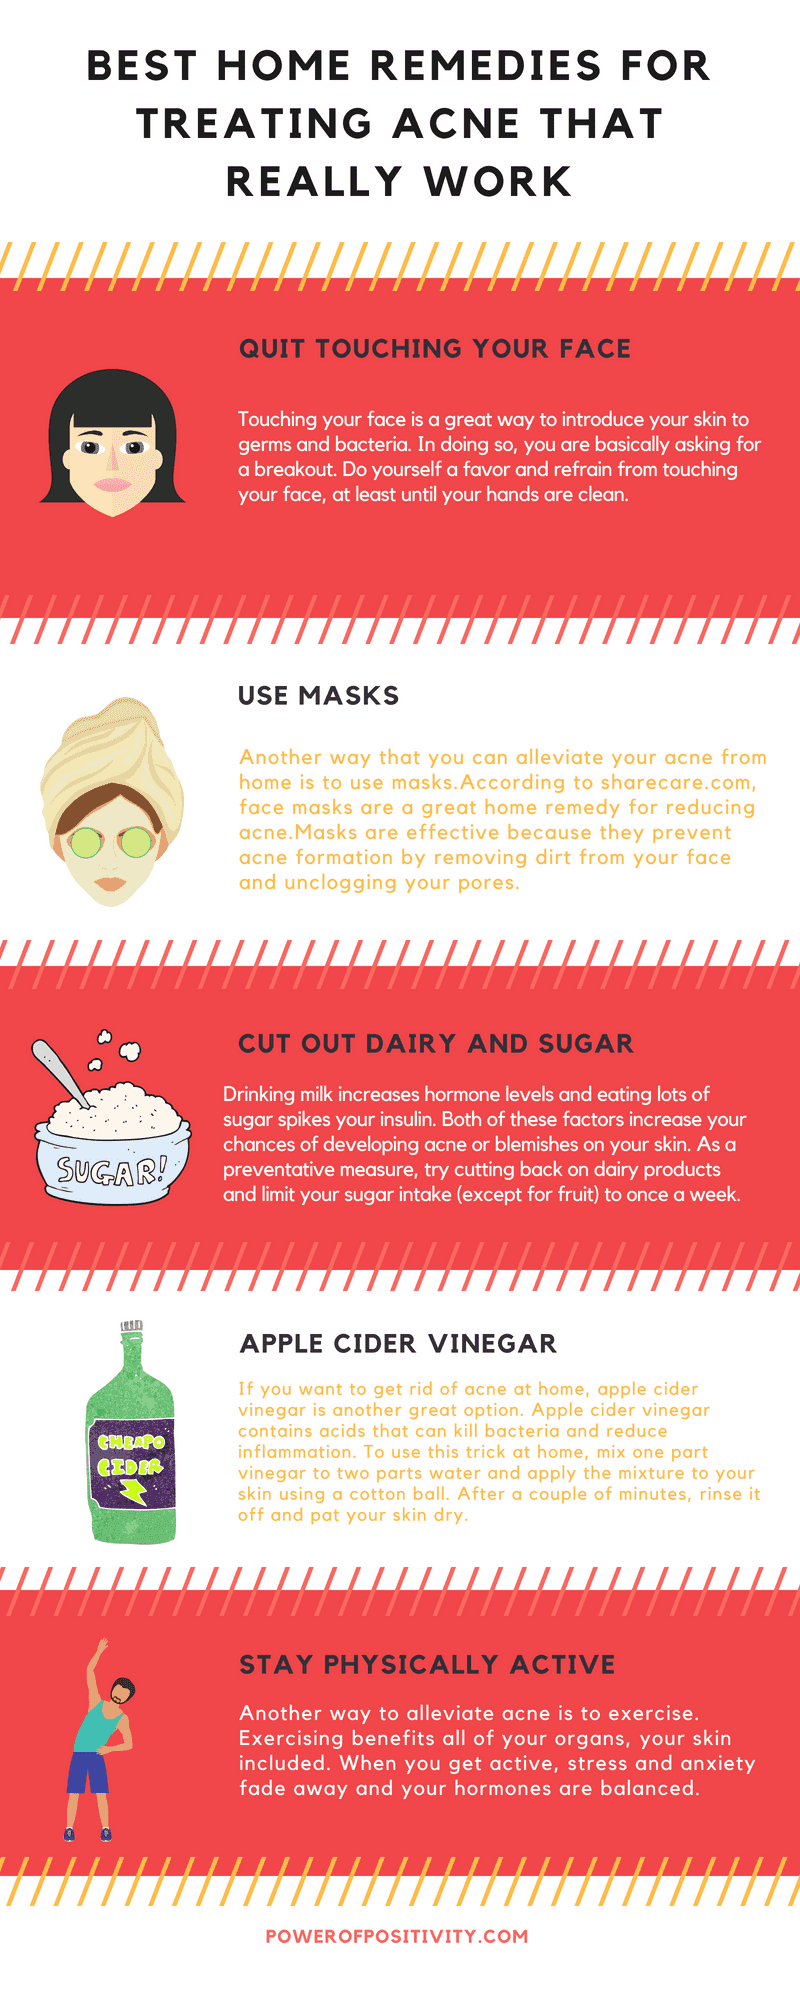 Best home remedies for treating acne that really work